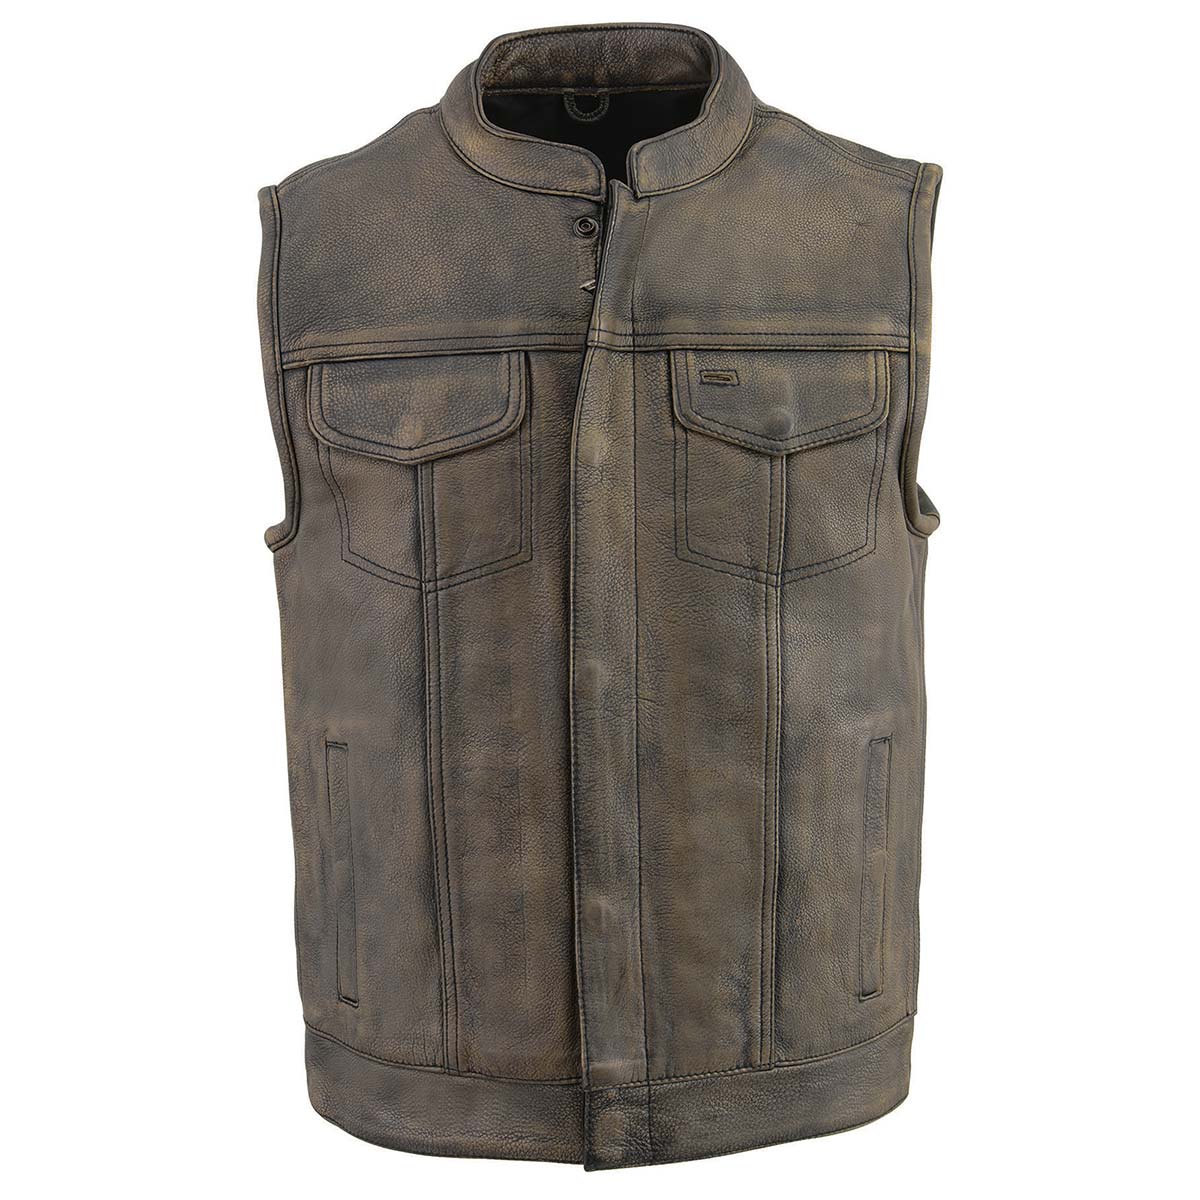 Men's Distressed Brown Dual Closure Open Neck Club Motorcycle Leather Vest